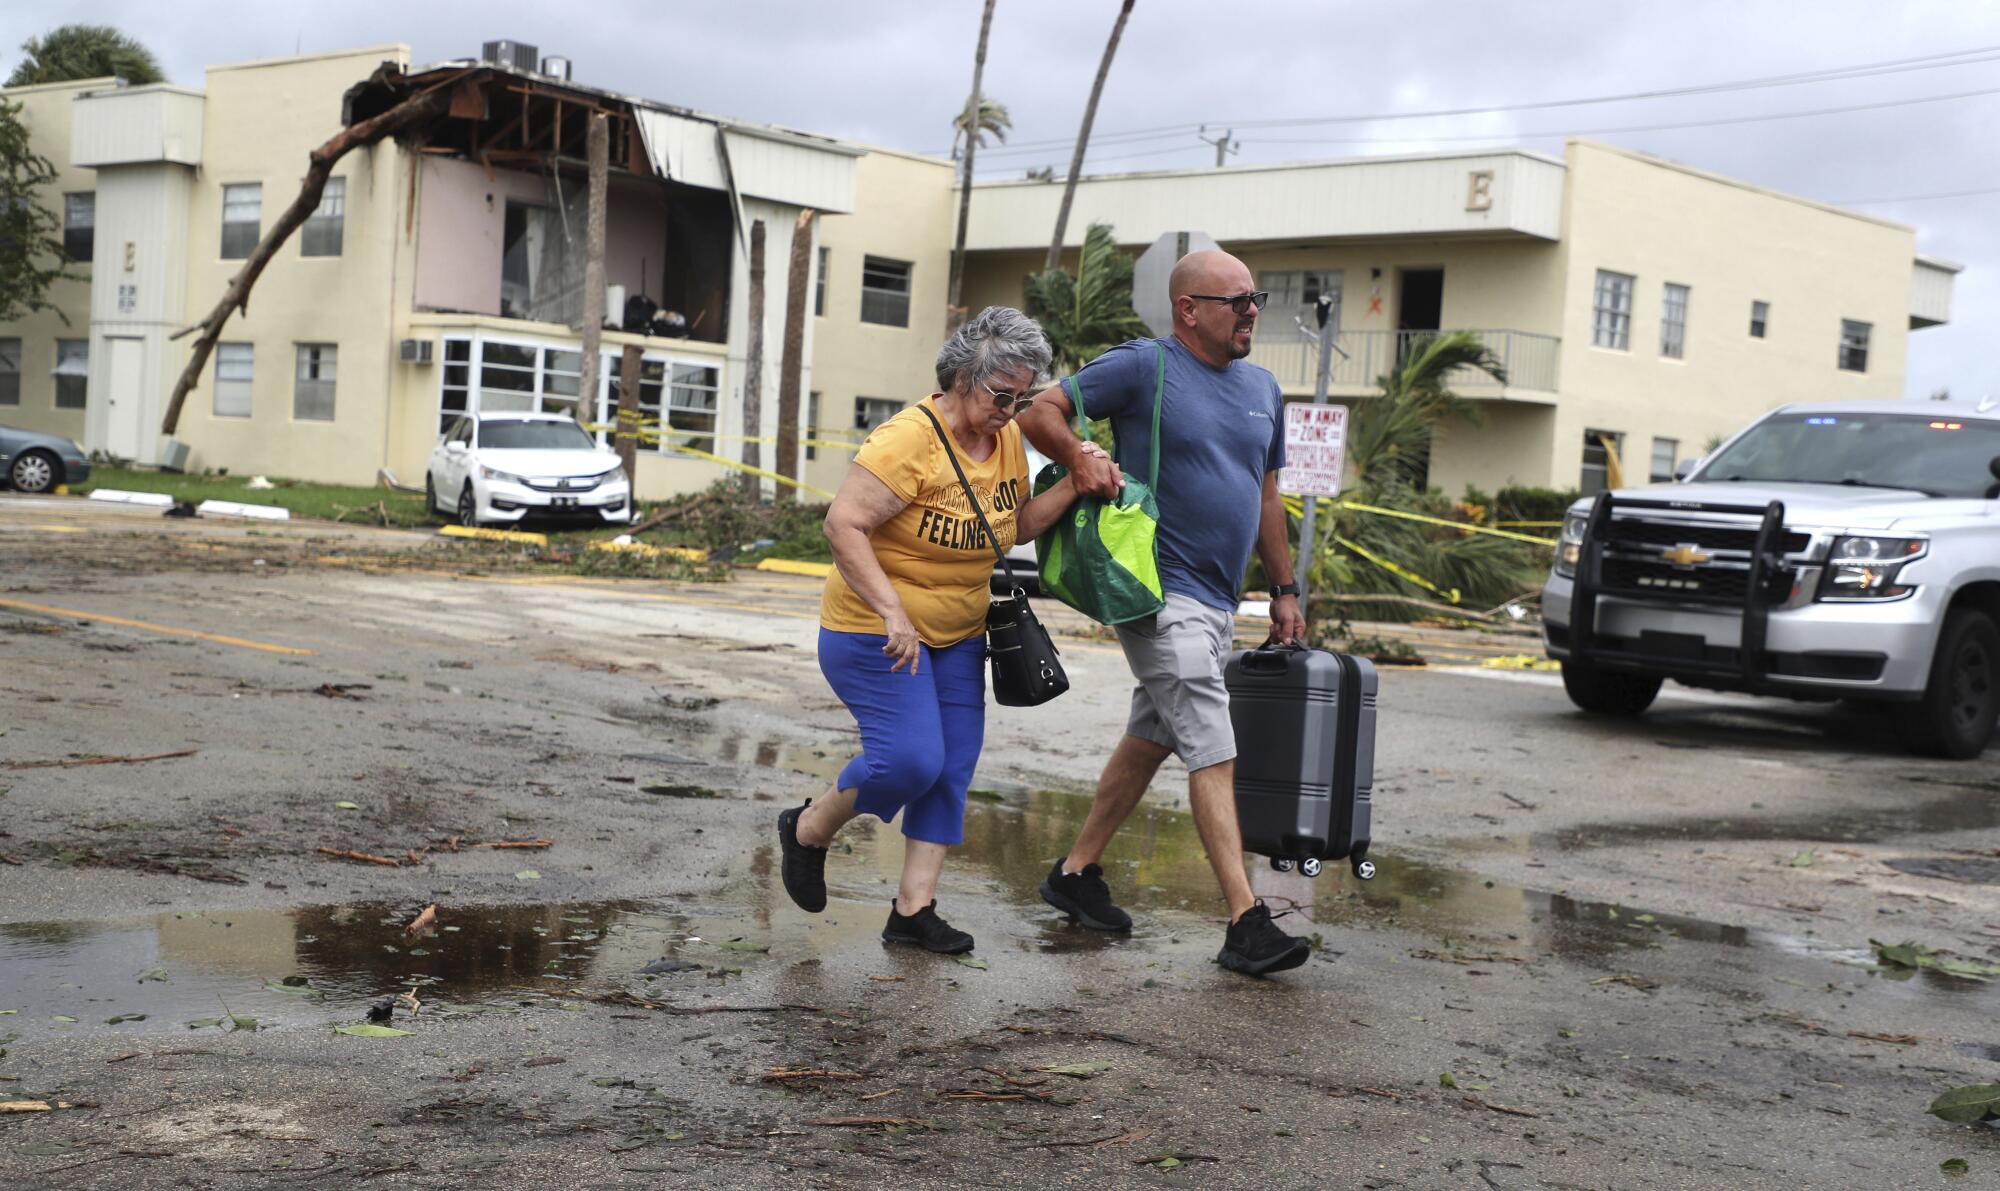 Maria Esturilho is escorted by her son Tony Esturilho as they leave behind damage from a tornado spawned from Hurricane Ian.